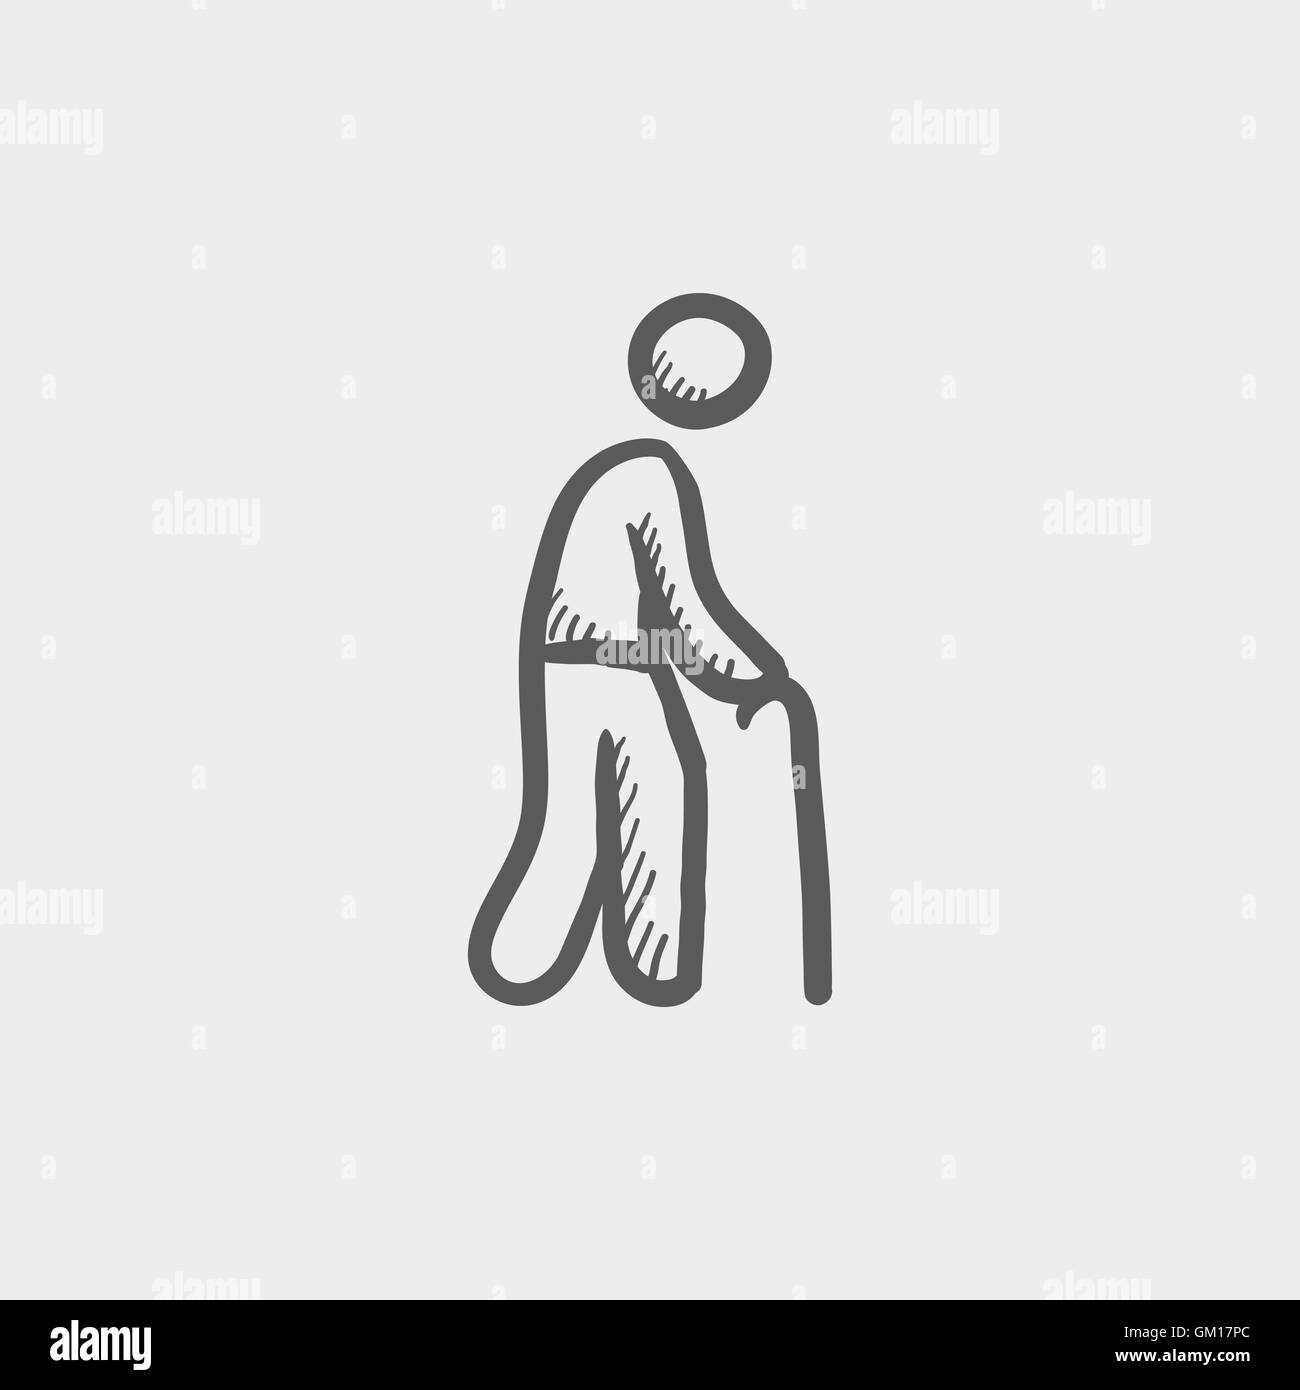 Man with cane sketch icon Stock Vector